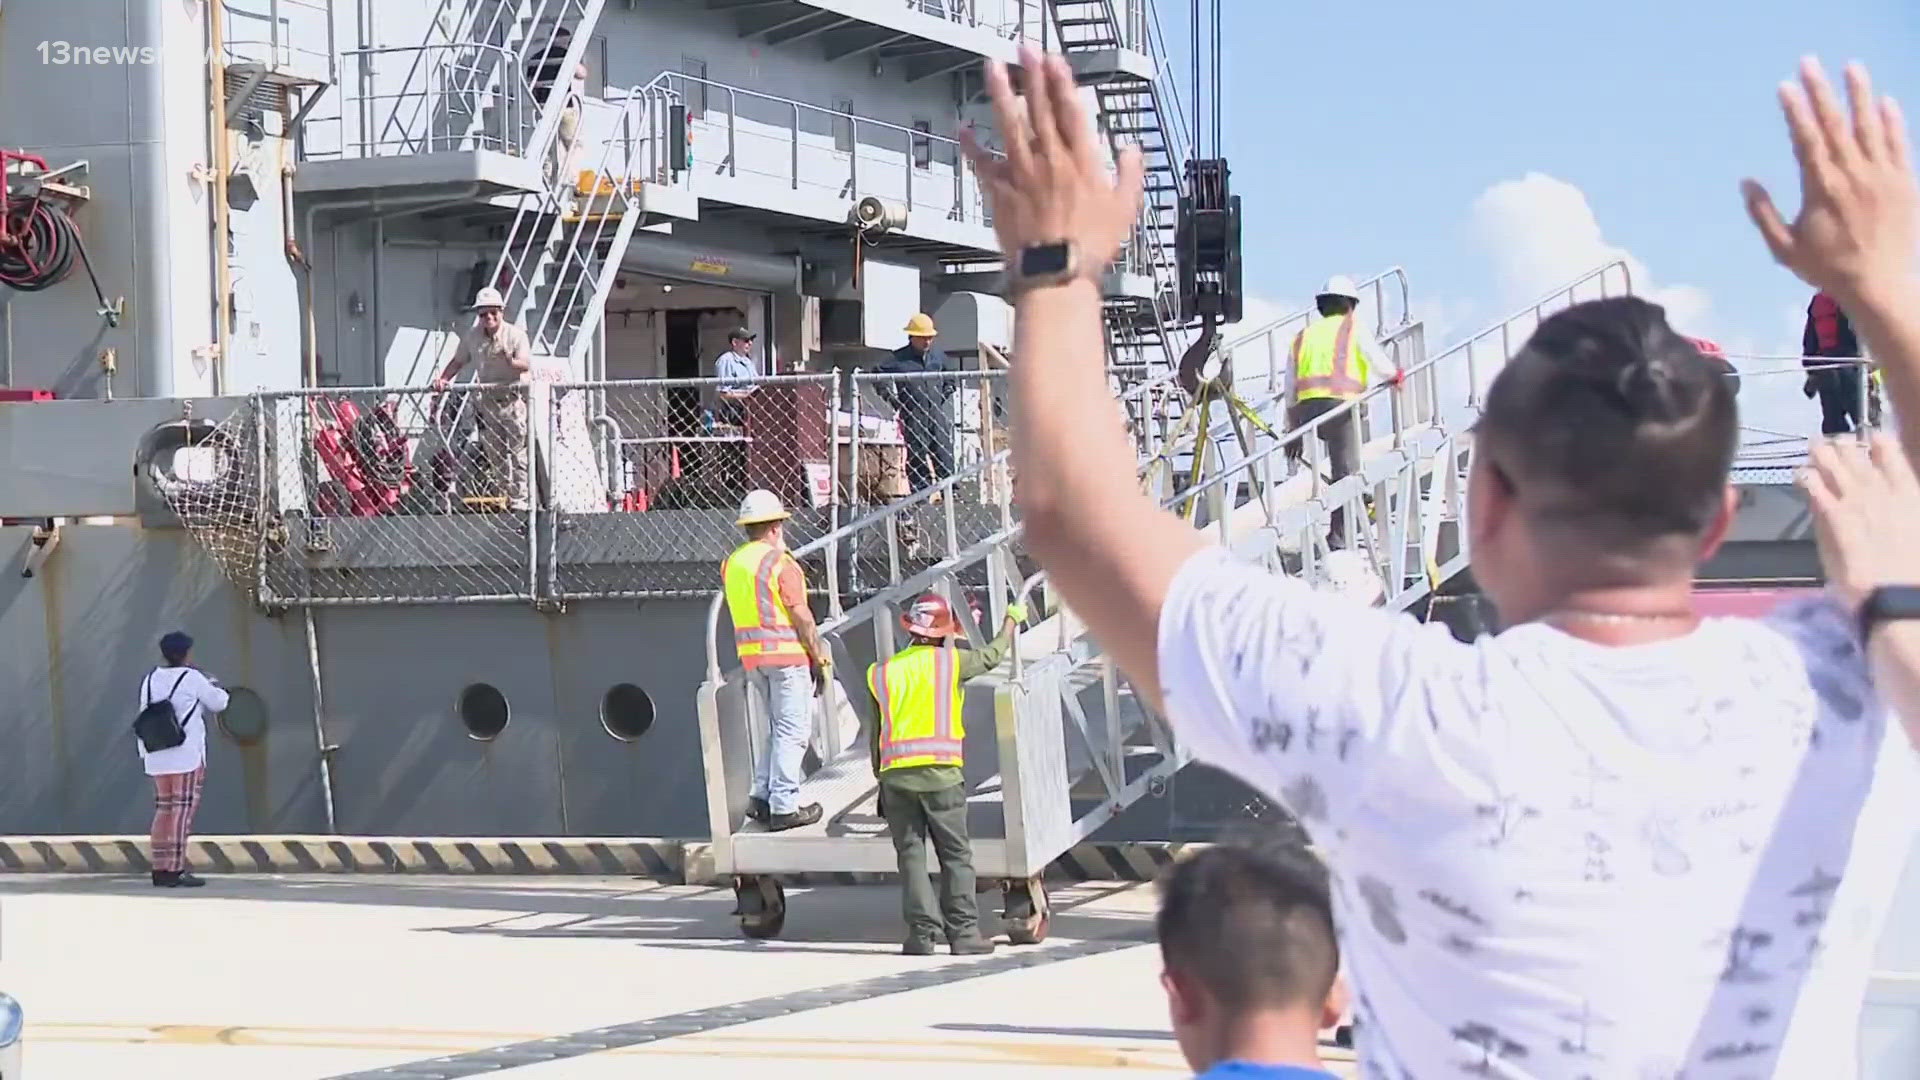 he crew docked at Naval Station Norfolk on Tuesday morning, greeted by loved ones.